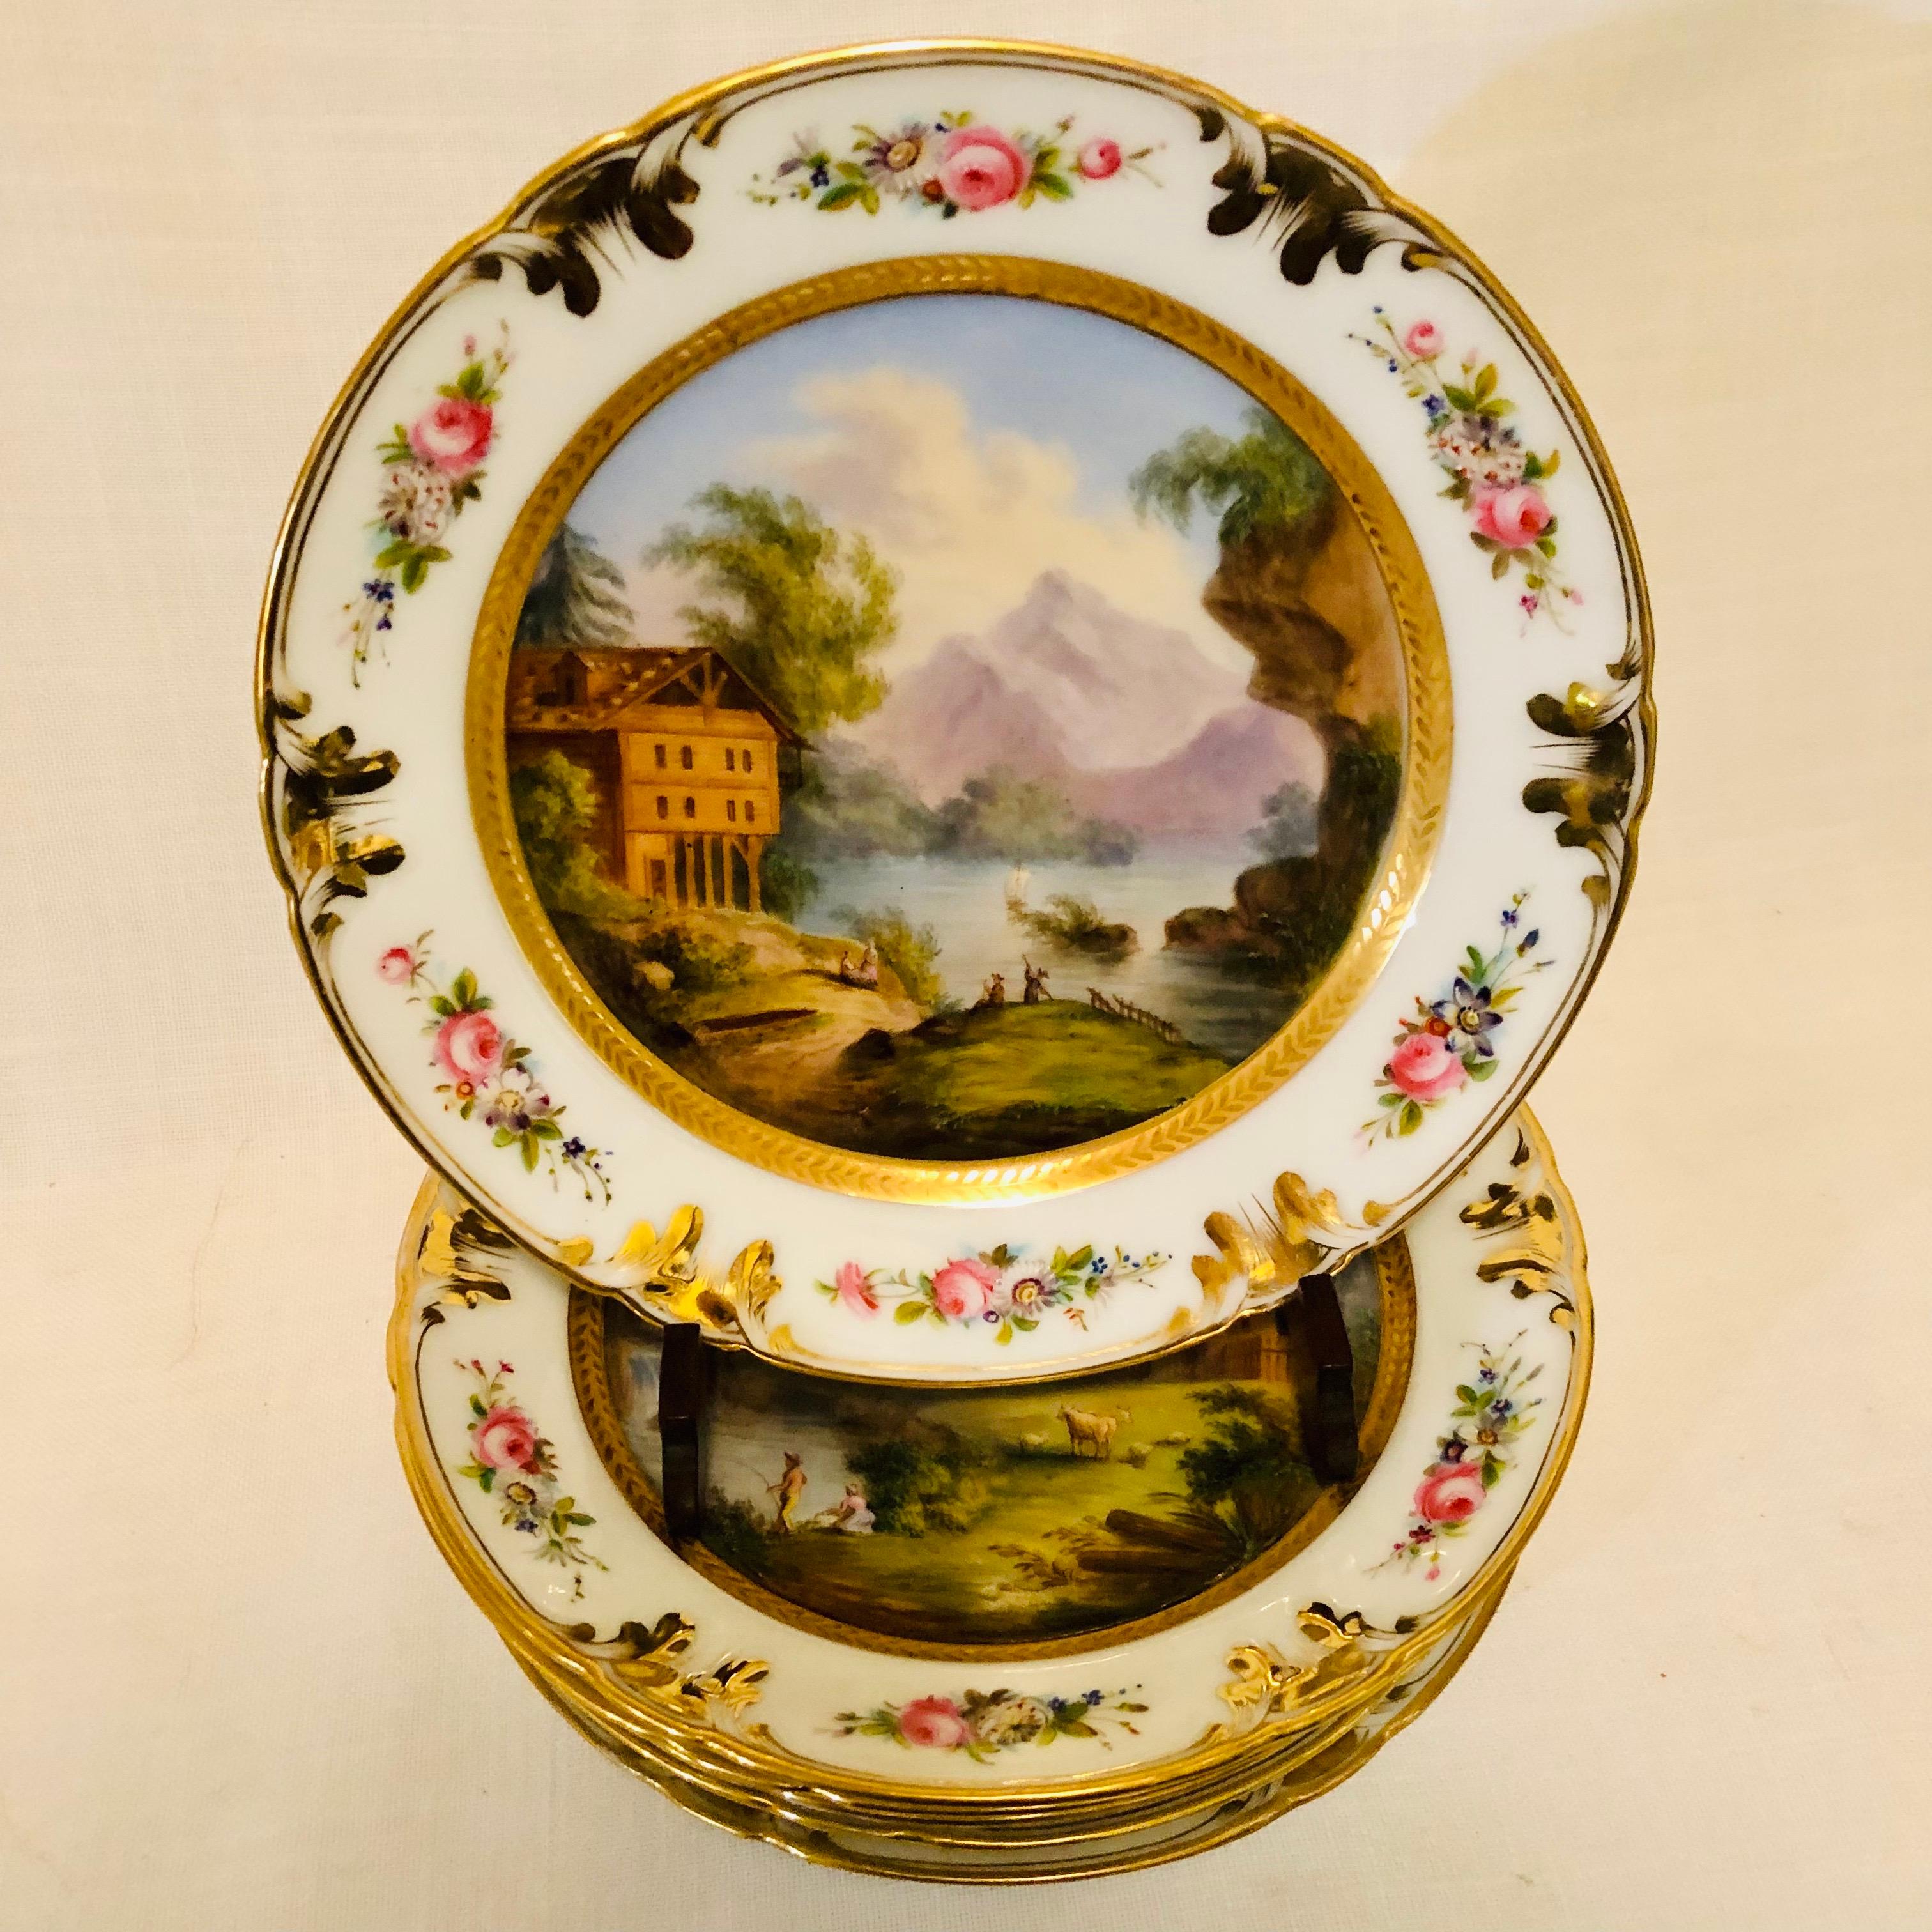 This is a fabulous set of six old Paris porcelain plates beautifully painted with six different landscape and seascape paintings. If you look at the attached pictures, you will see that all the six plates have gorgeous artwork. They do not look like